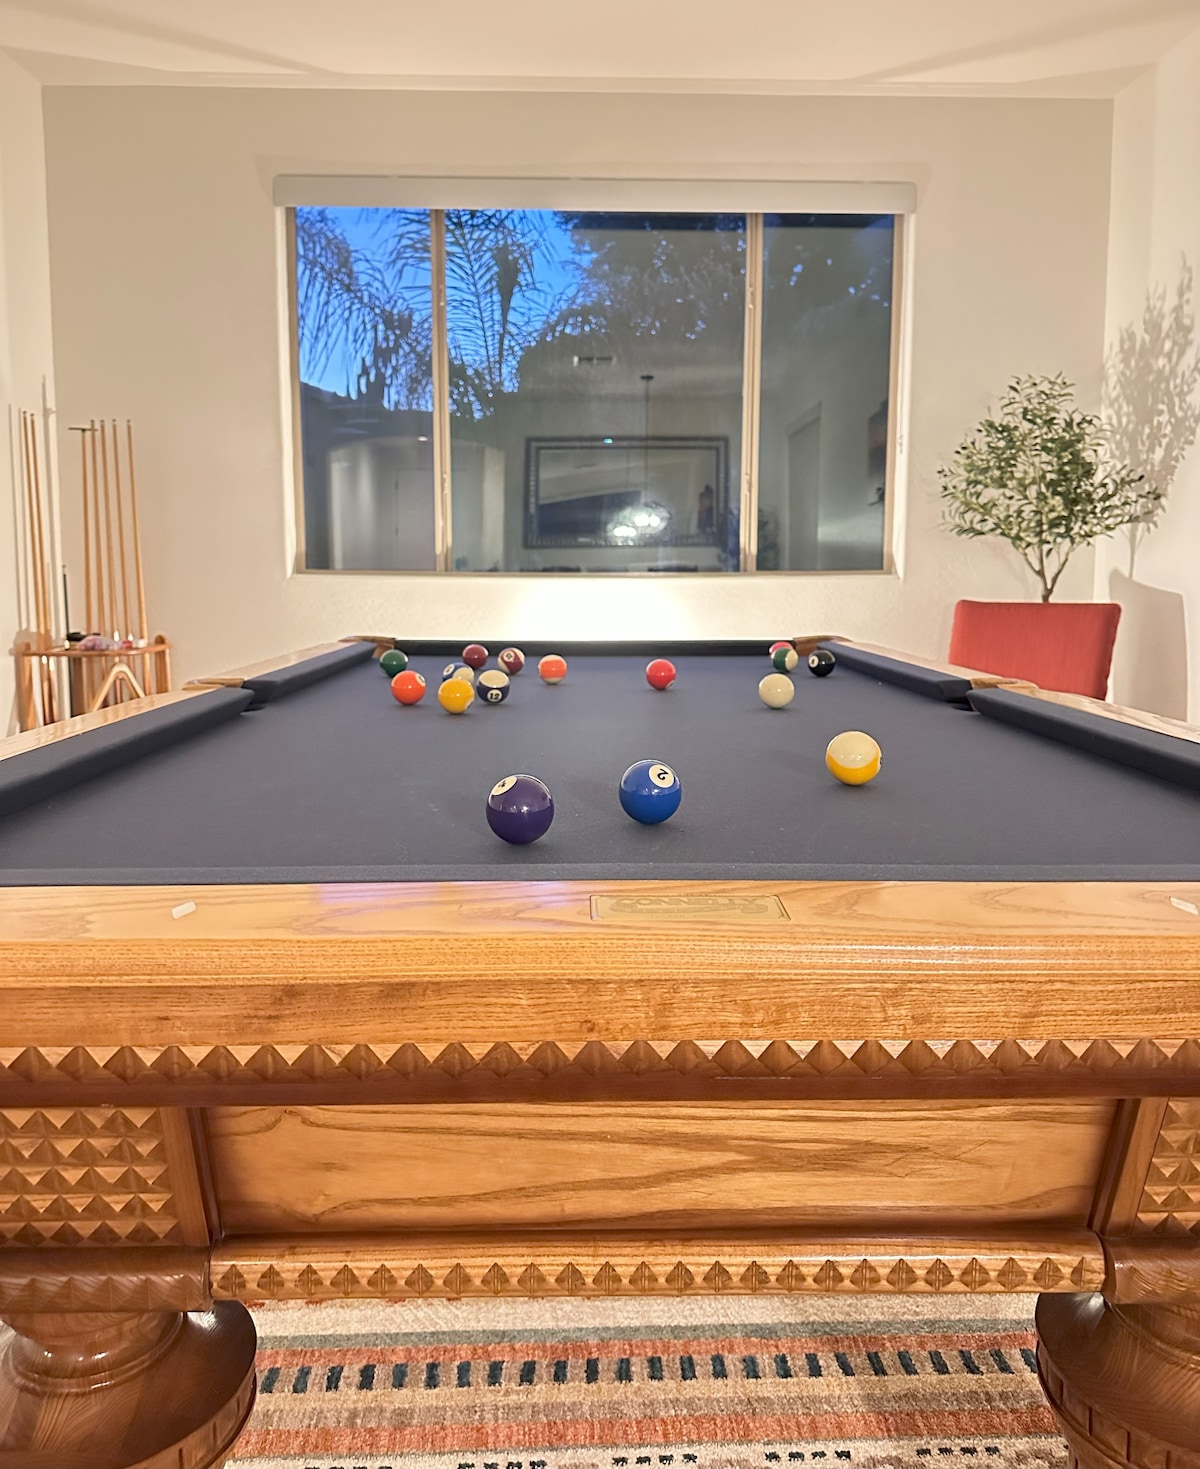 Pool, Fire Pit, Pool Table, BBQ Grill